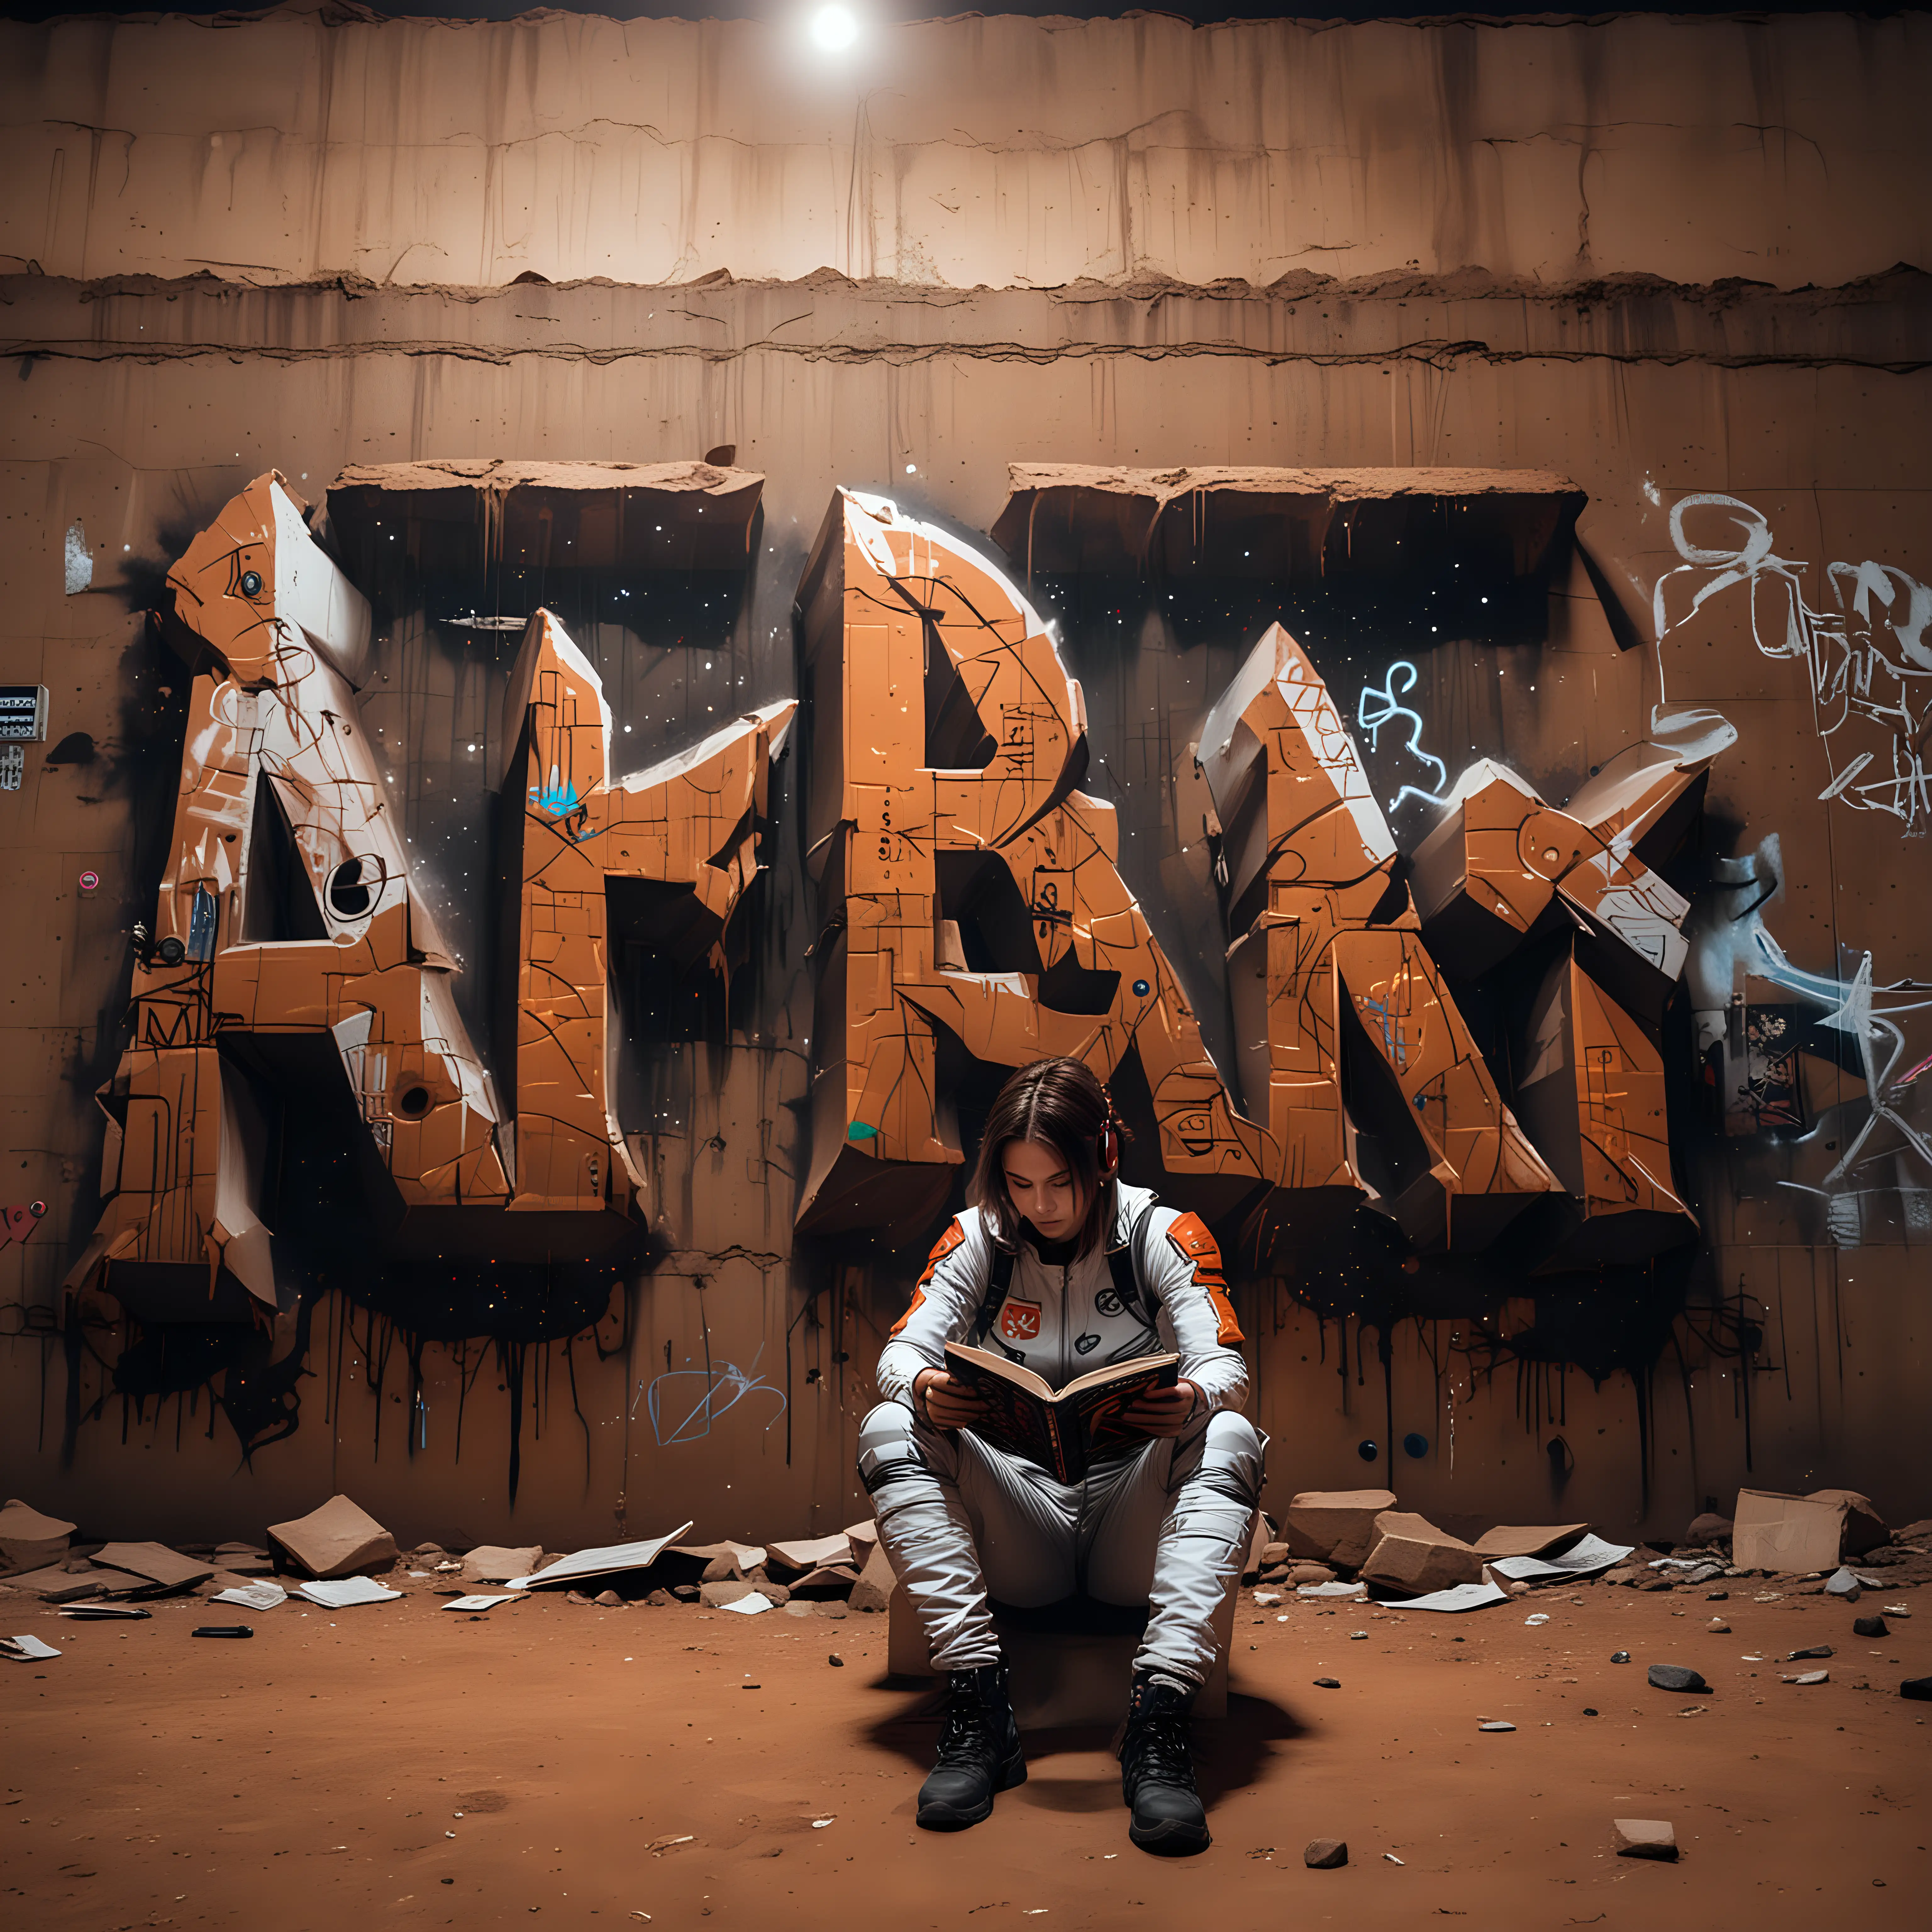  Free standing,  wall of Graffiti, with a large letter R, on mars, at night, diverse girl, wearing cyberpunk space suit, think Laura croft, tomb raider, sitting, reading a book